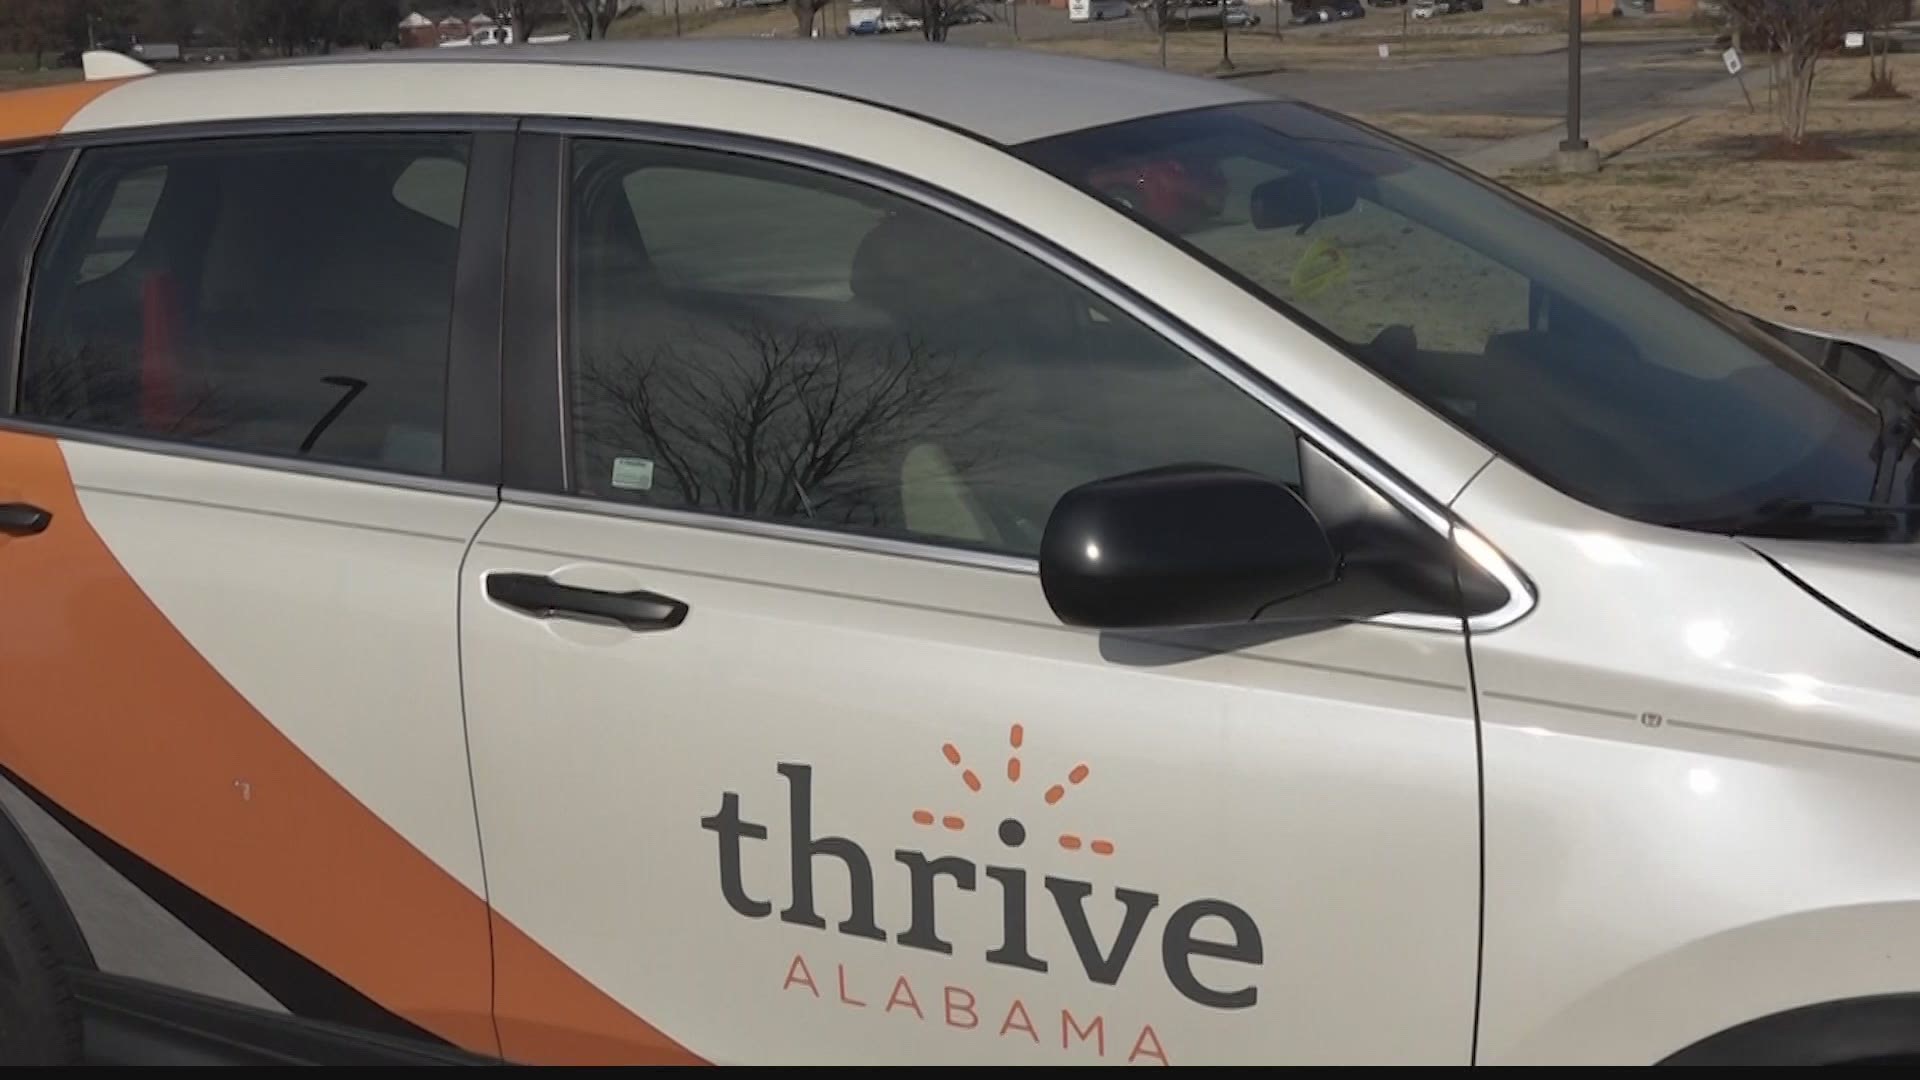 Huntsville Hospital and Thrive Alabama teamed up to administer these free tests at a predominantly black university.